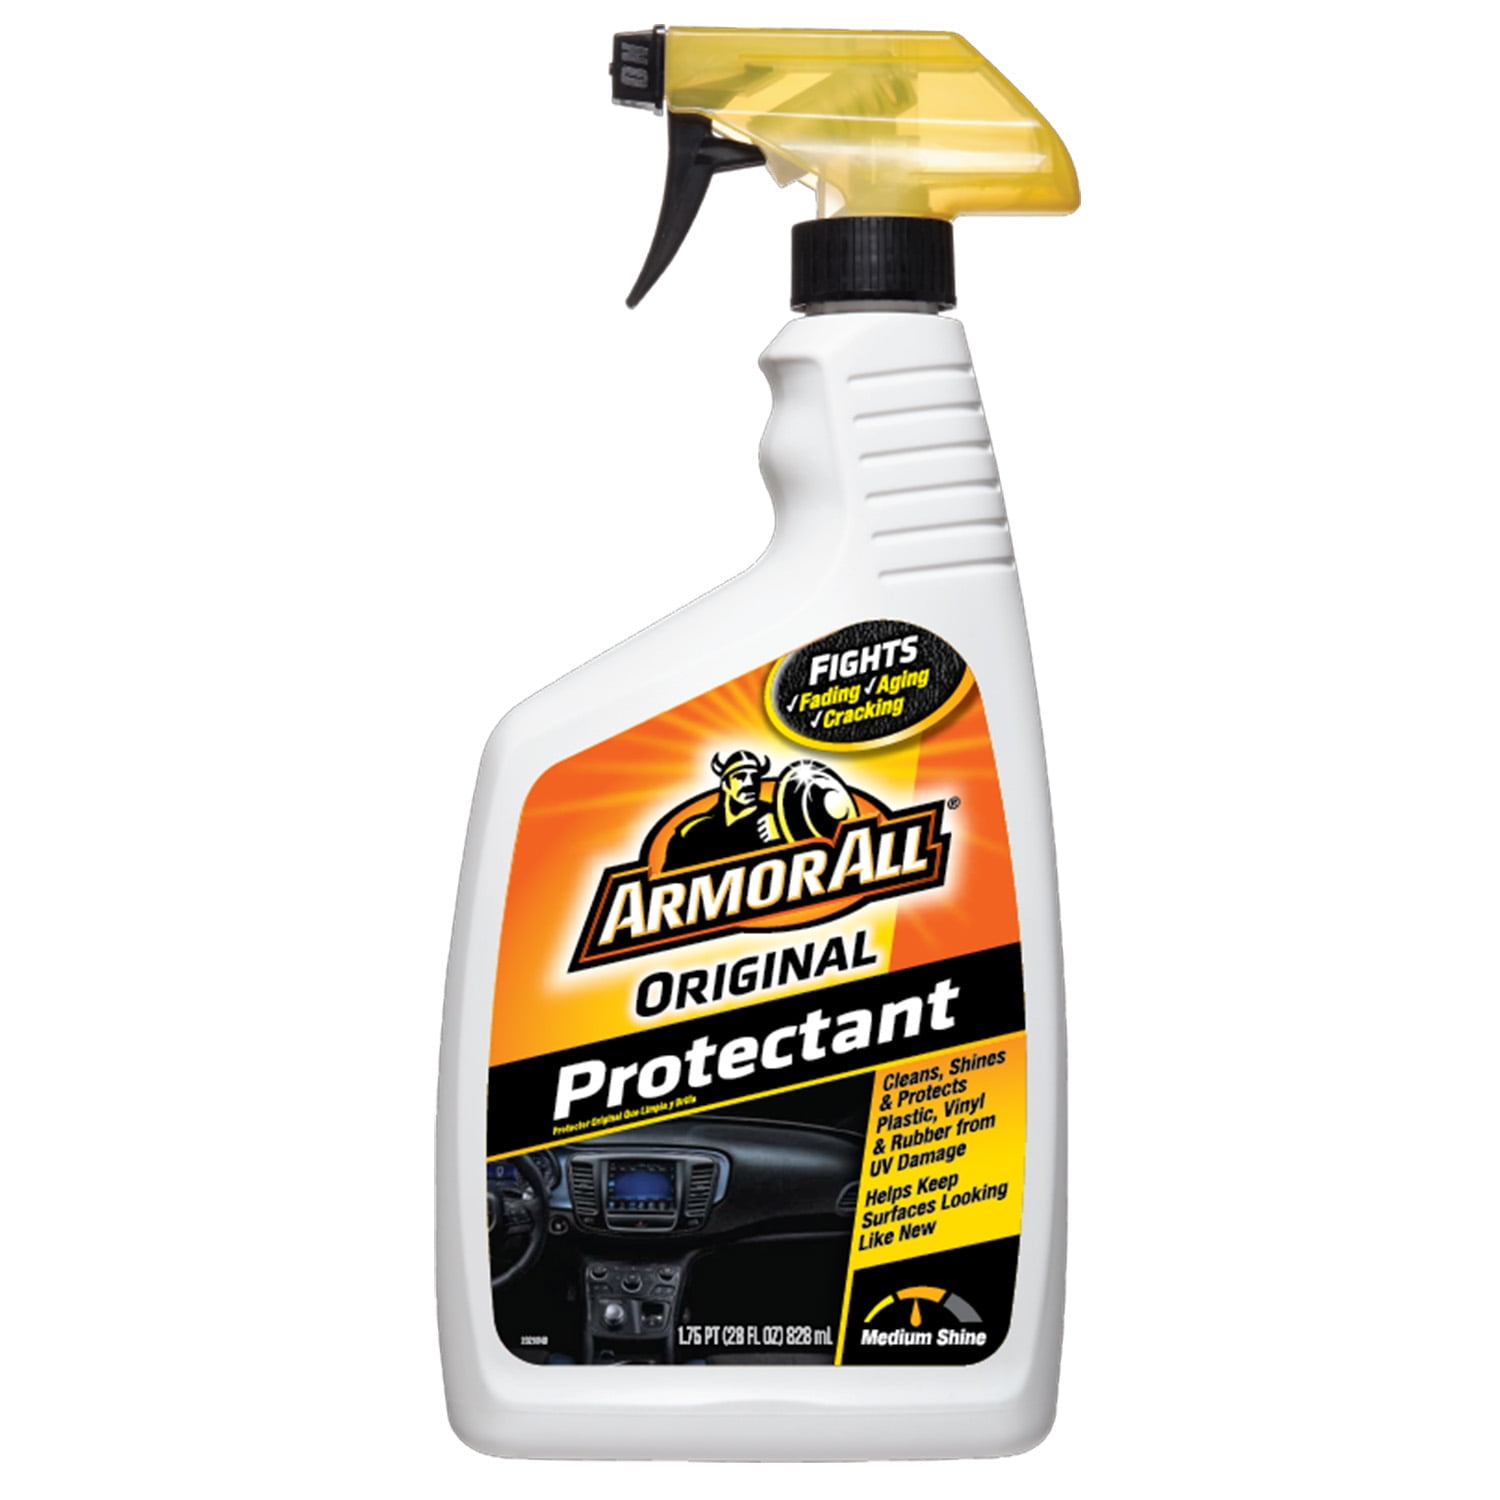 armor protectant spray can i use it on my rc car to clean the dirt